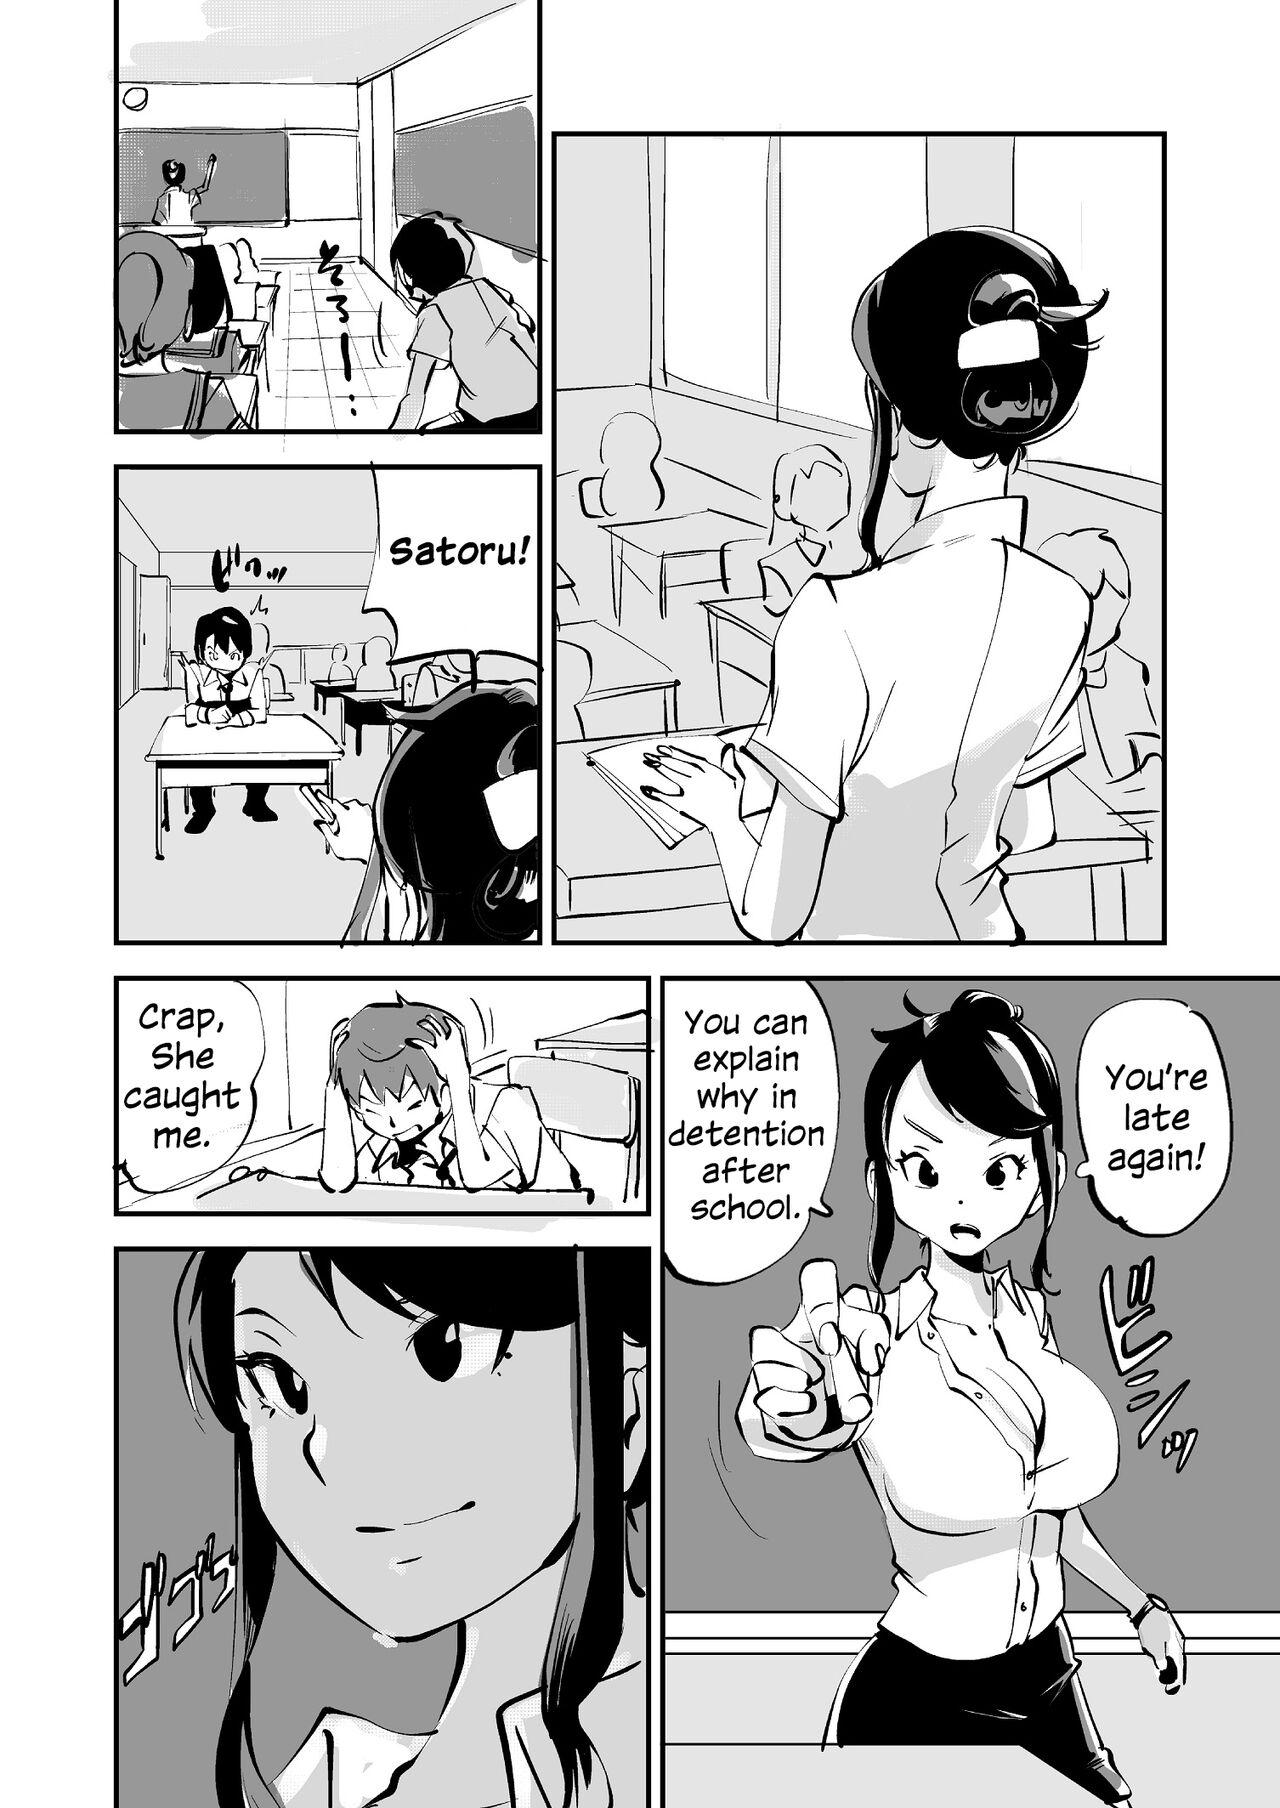 The Flesh Swapper Manga Best Blowjobs Ever - Picture 2